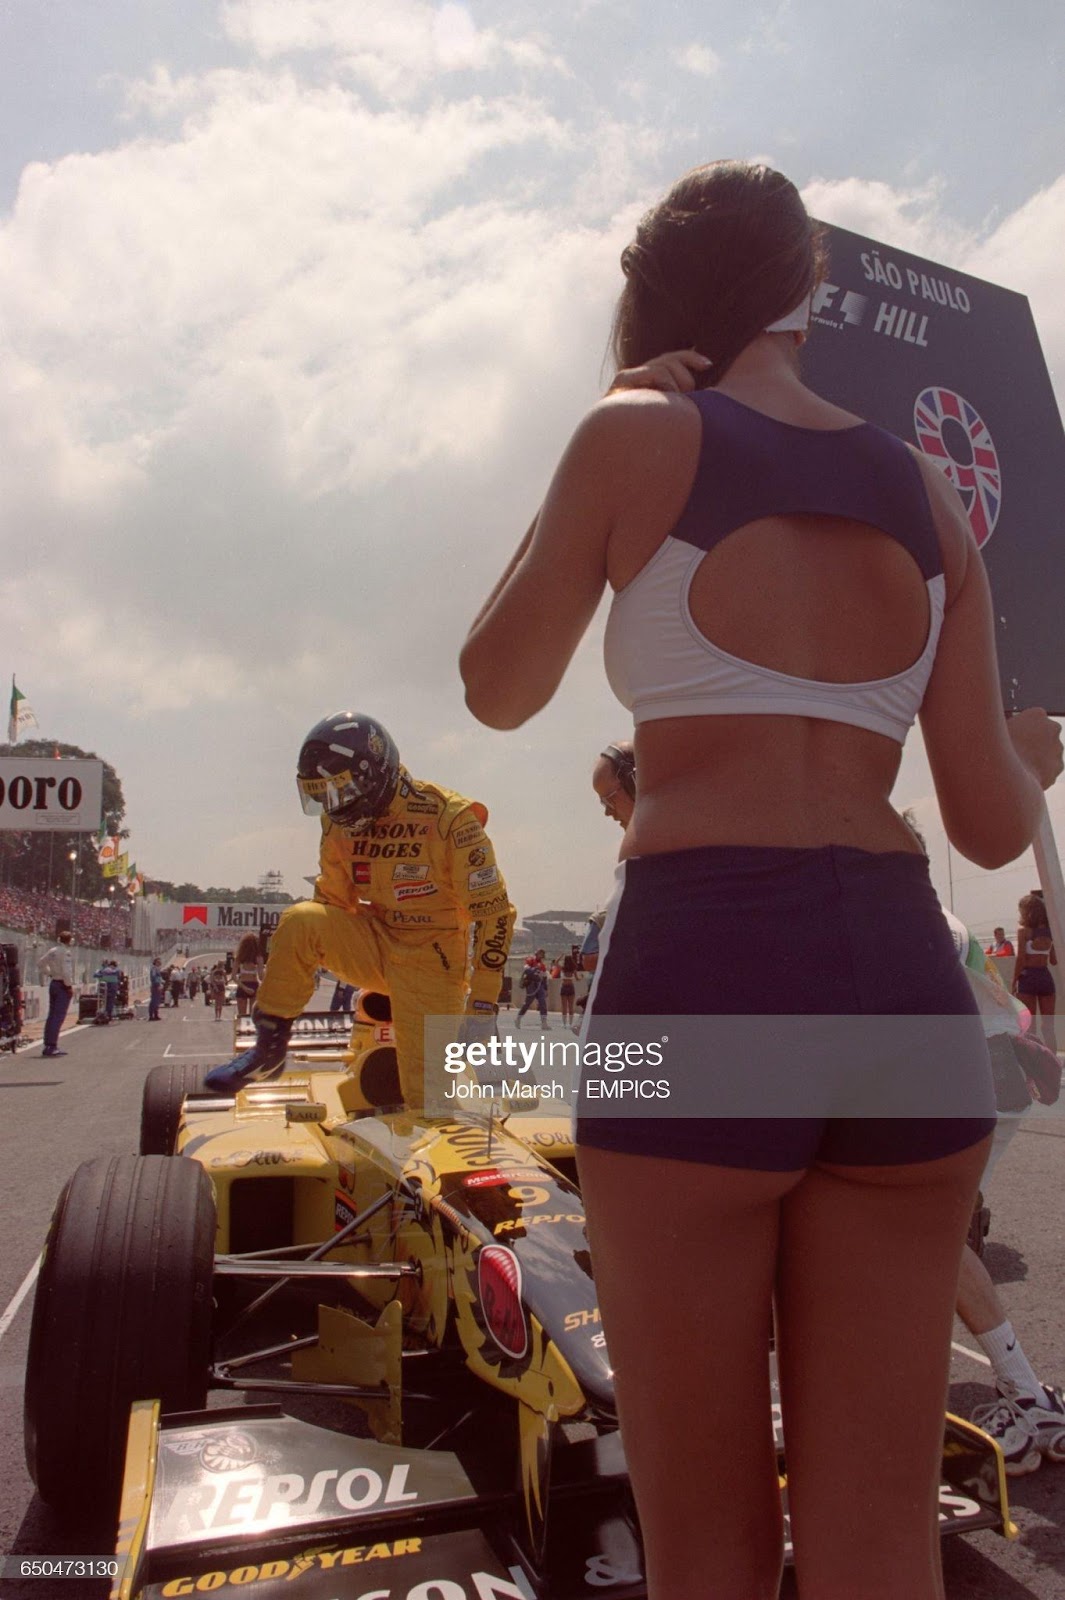 D:\Documenti\posts\posts\Women and motorsport\foto\Getty e altre\damon-hill-on-the-grid-with-his-grid-girl-picture-id650473130.jpg